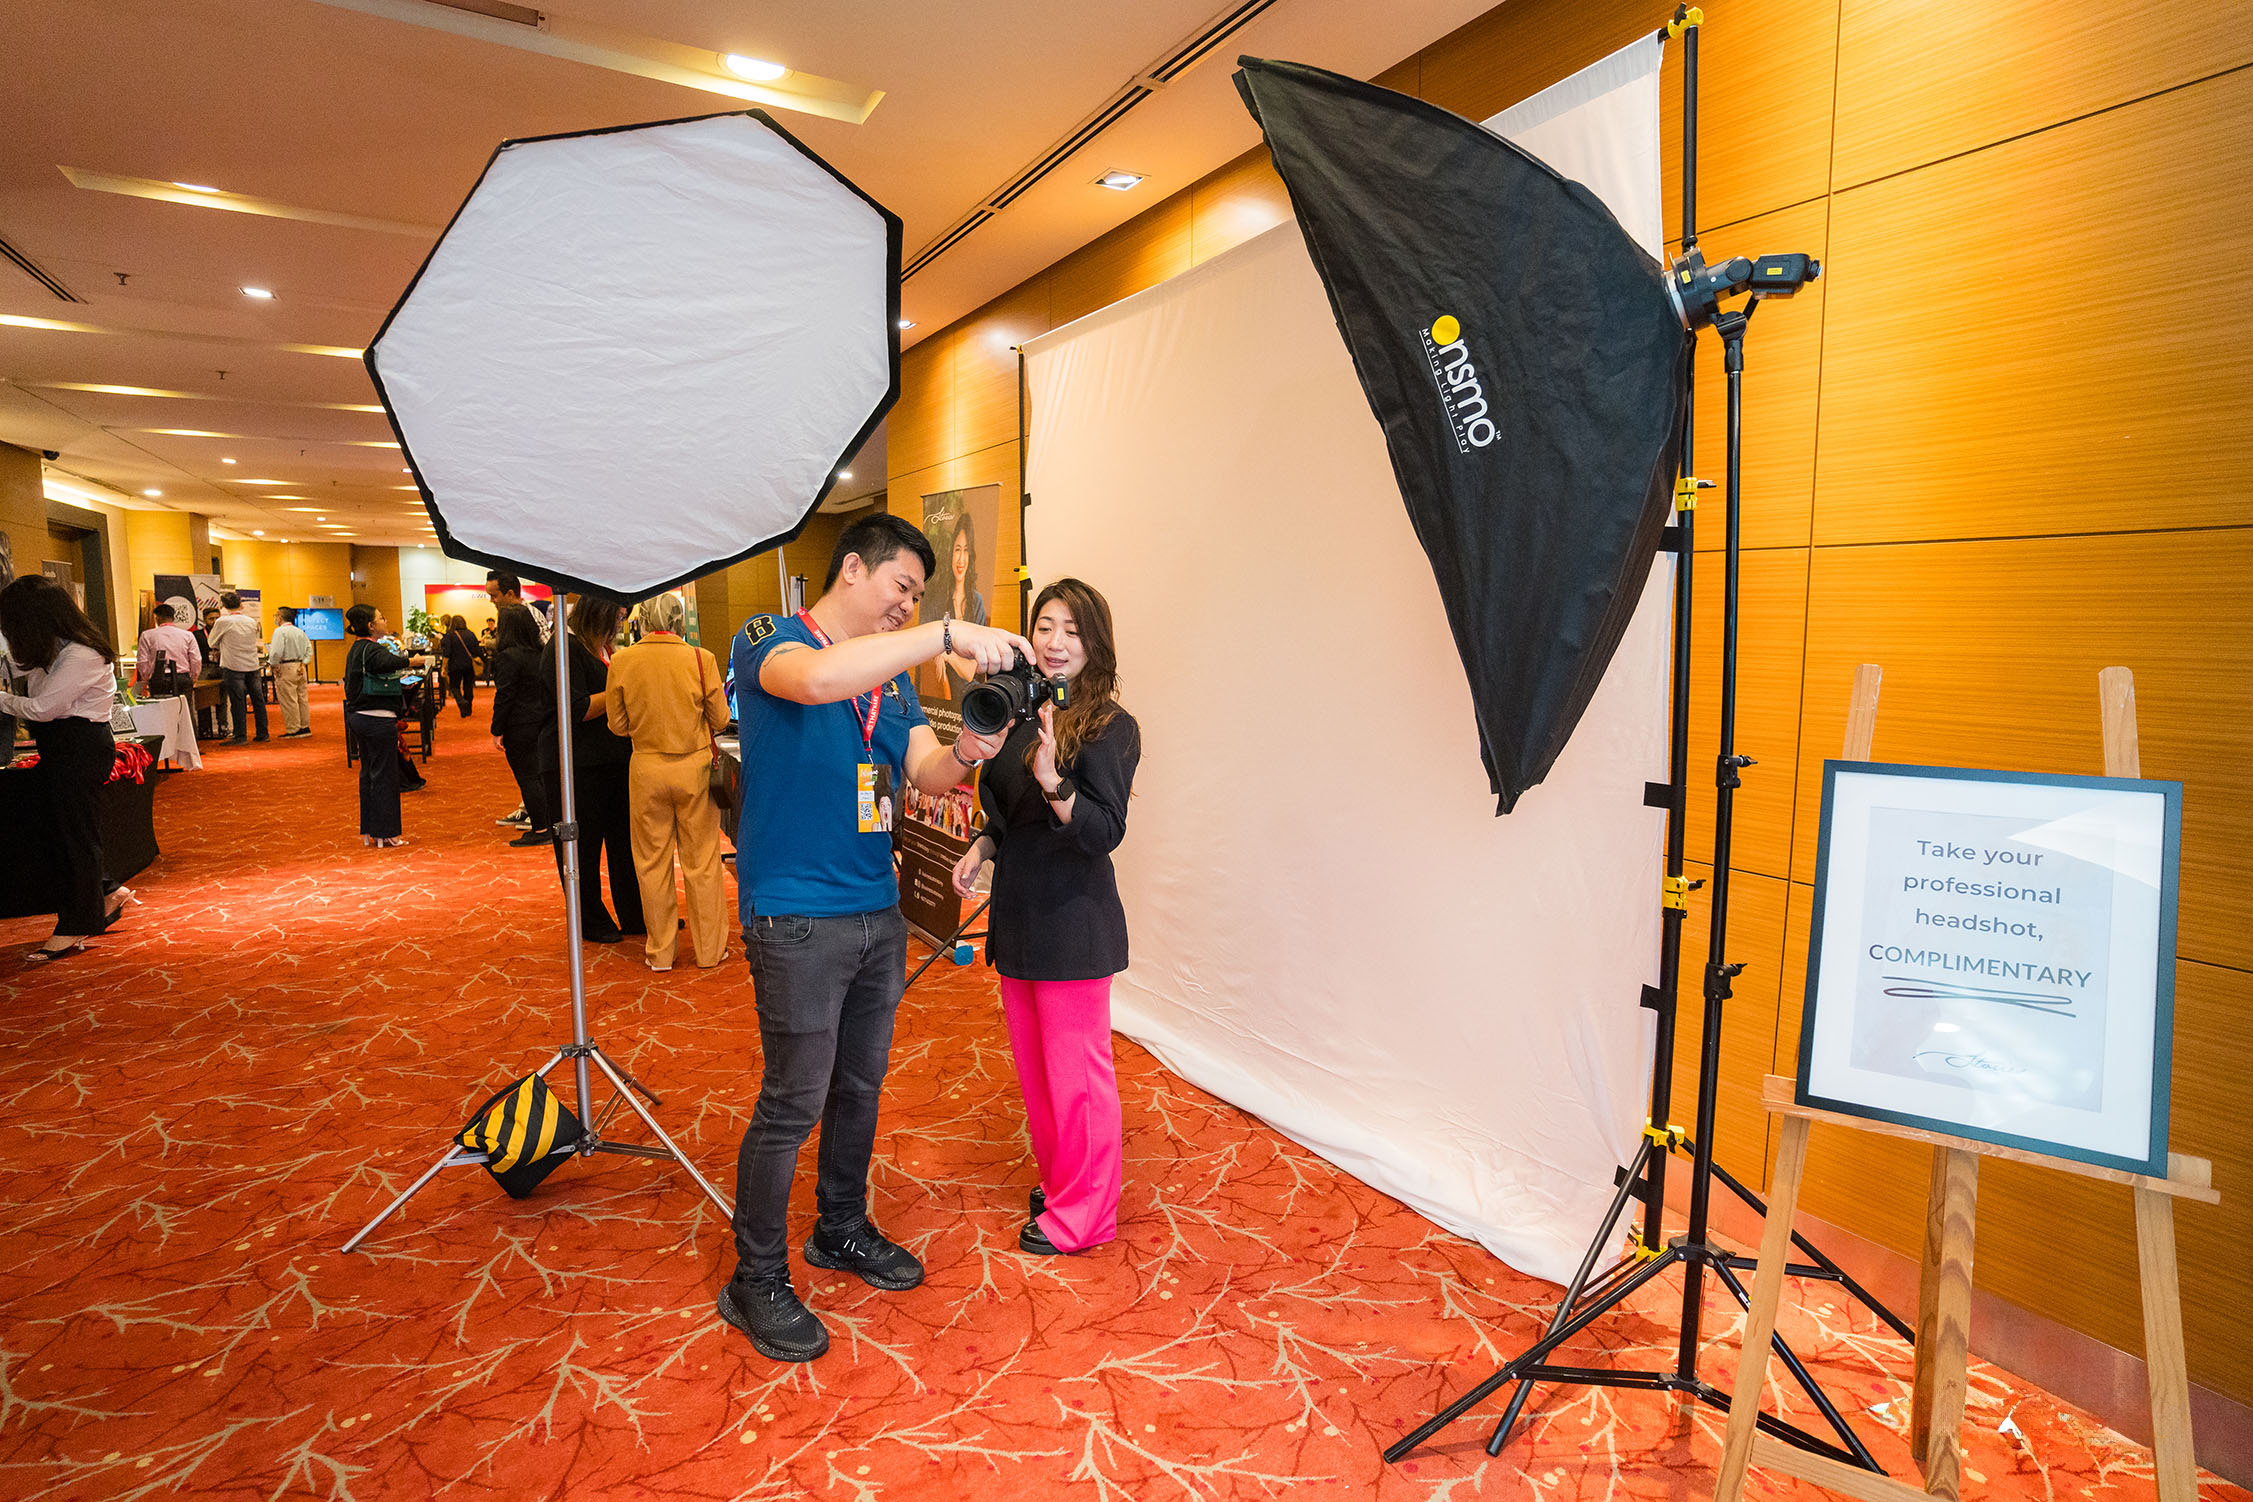 Planning a Headshot Booth for your Corporate Event